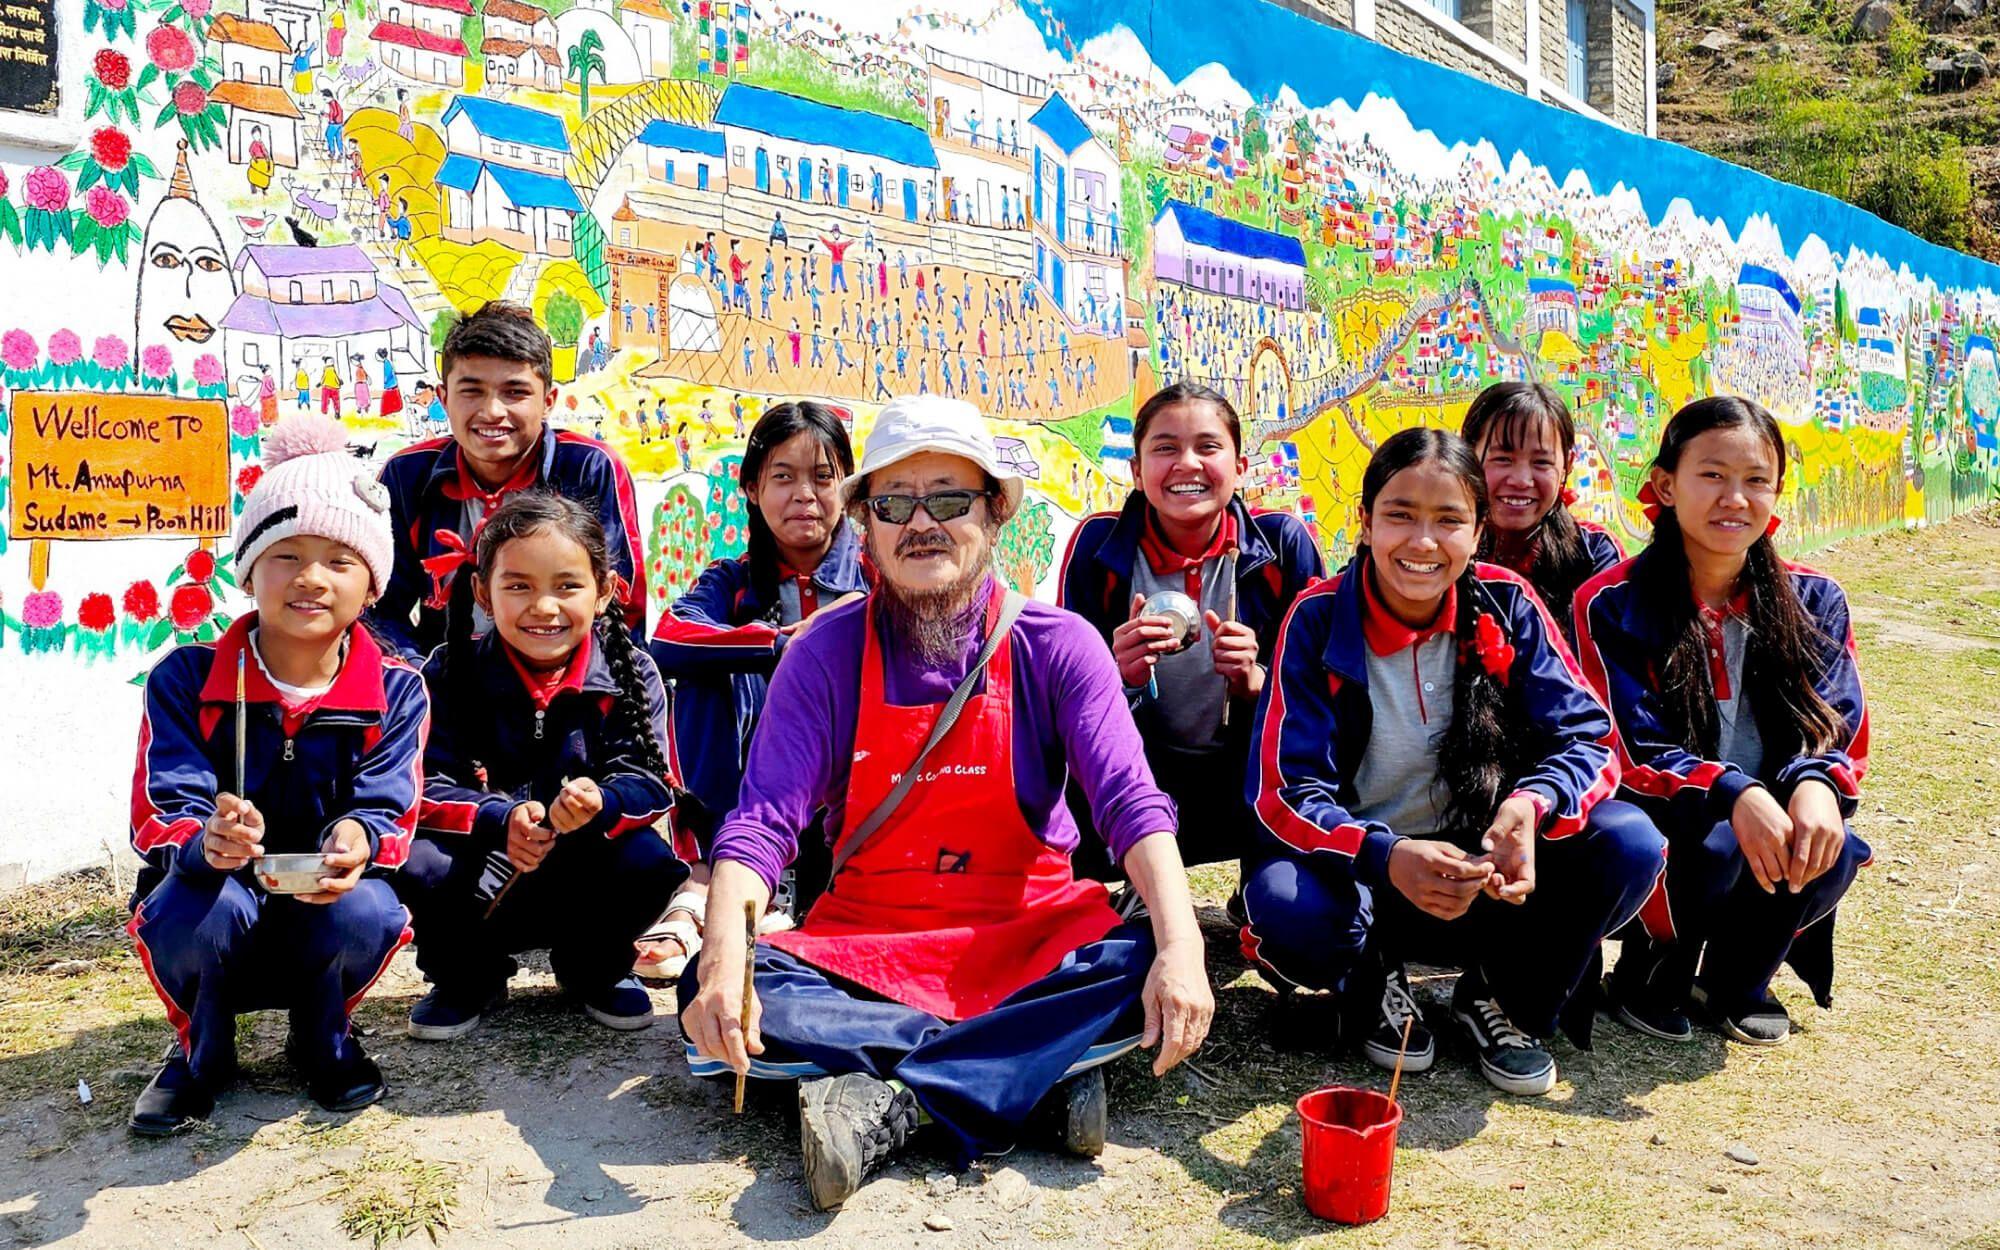 A teacher of the arts, Kyu-hyun uses art to spread awareness about climate action, both at home in Nepal and abroad.
Photographer: Kyu-hyun Kim